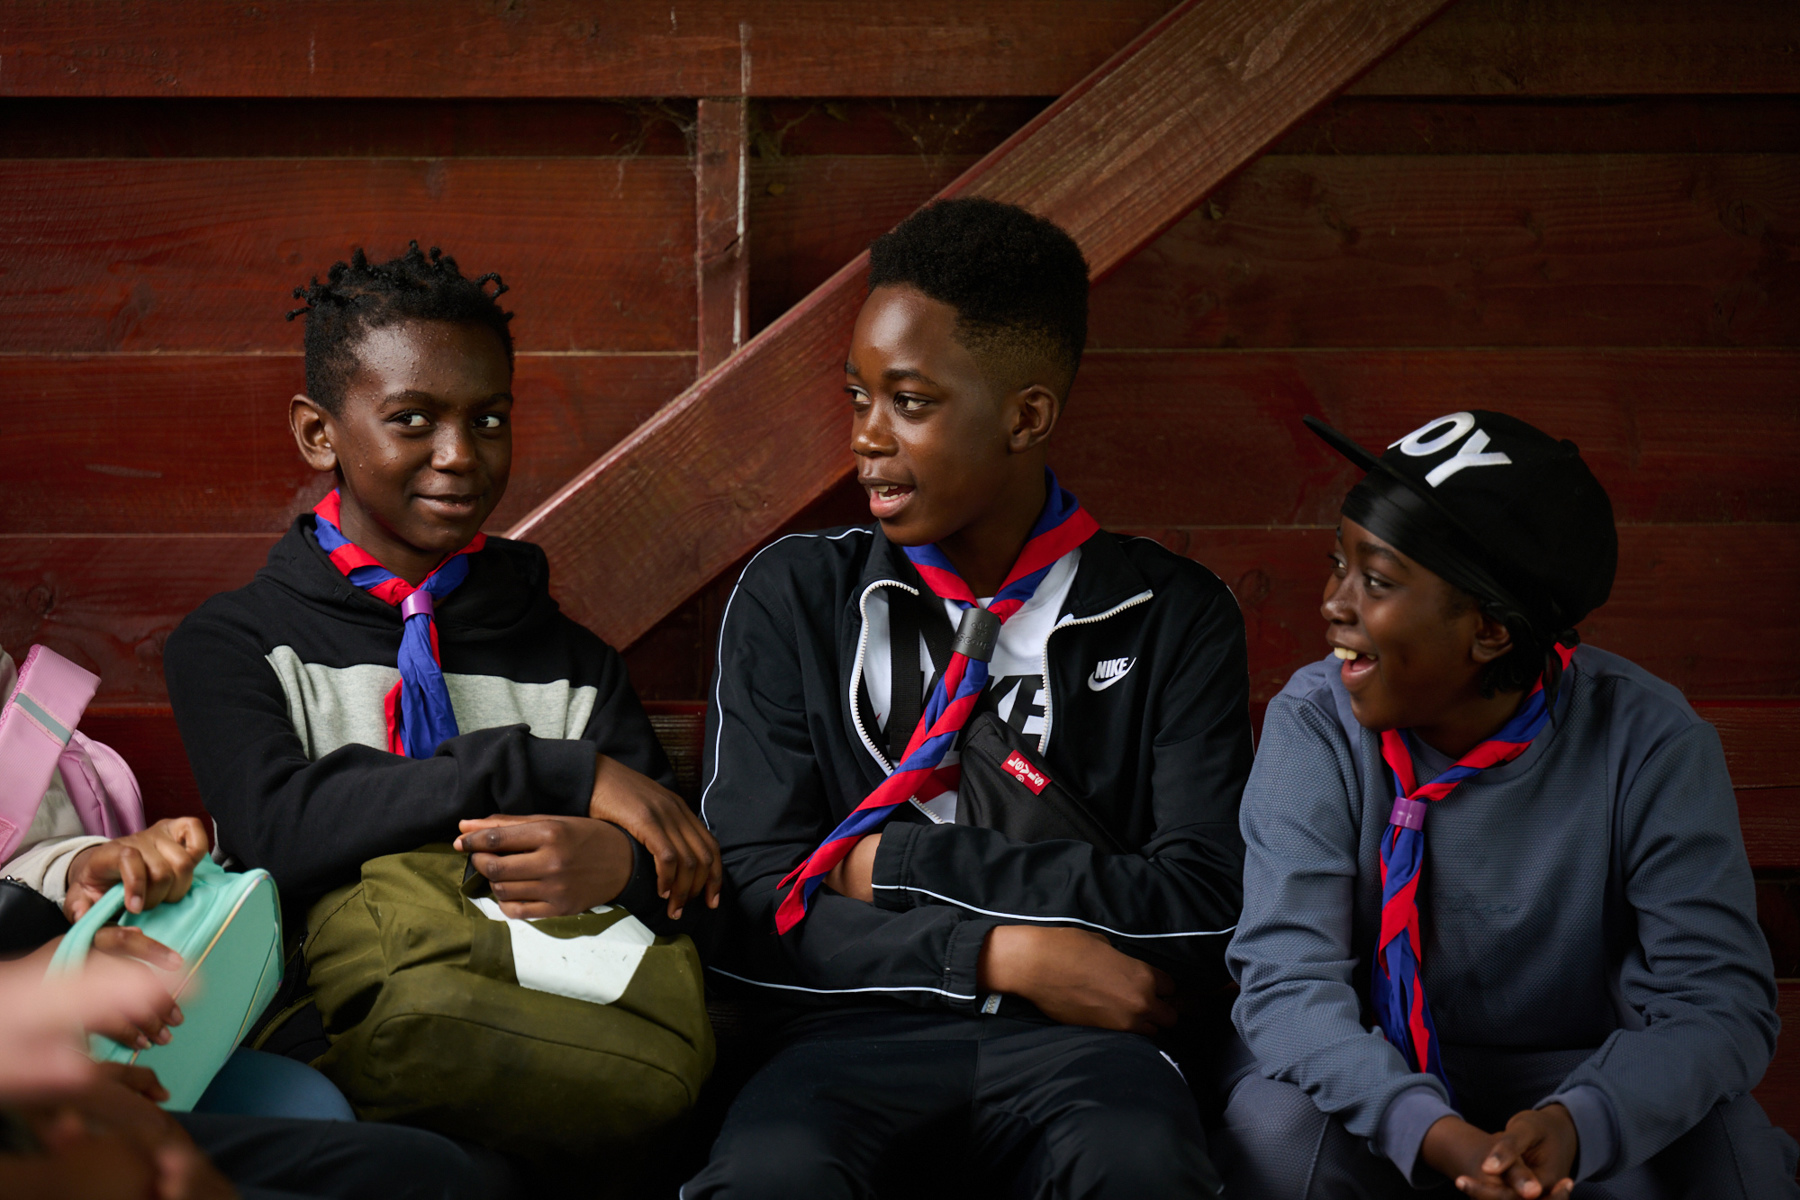 Group of three Scouts sat together indoors wearing blue and red scarves 